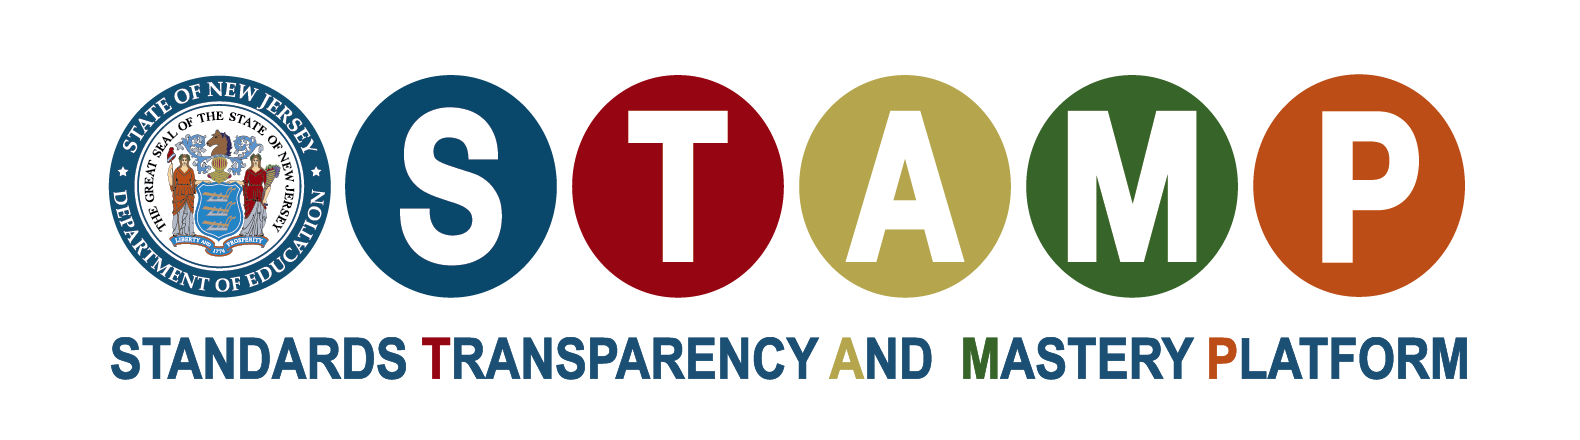 Logo: STAMP. Standards transparency and mastery platform. (State of New Jersey Department of Education)